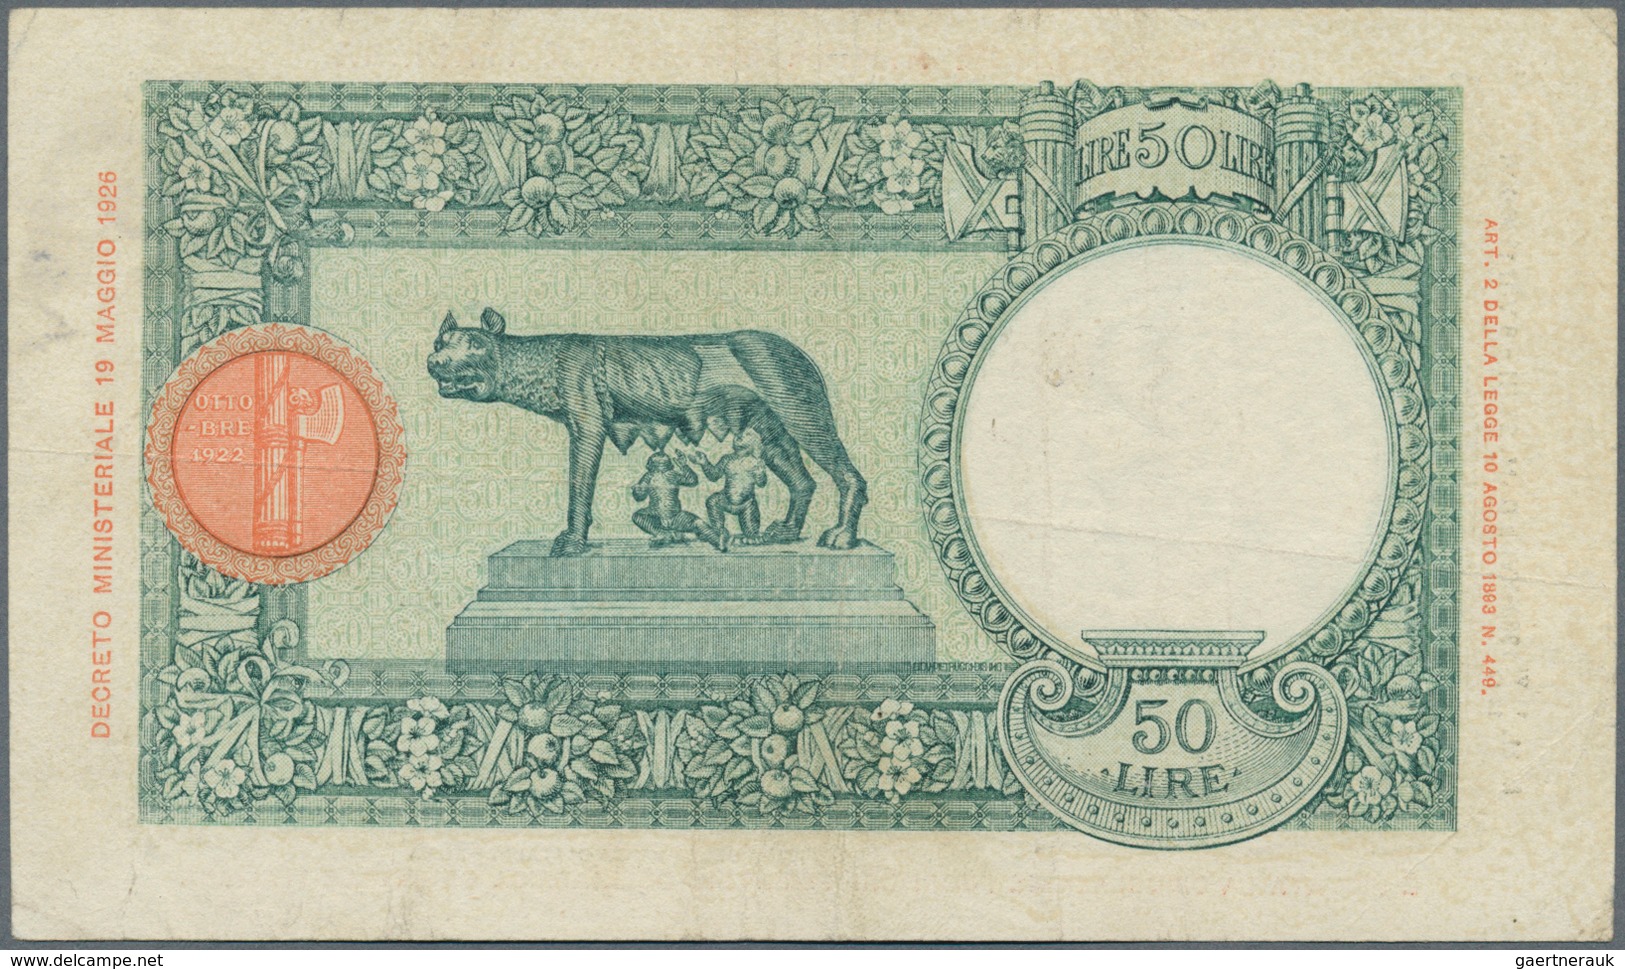 Italian East Africa / Italienisch Ost-Afrika: 50 Lire 1938 P. 1, Used With Folds, Pressed But Strong - Italiaans Oost-Afrika